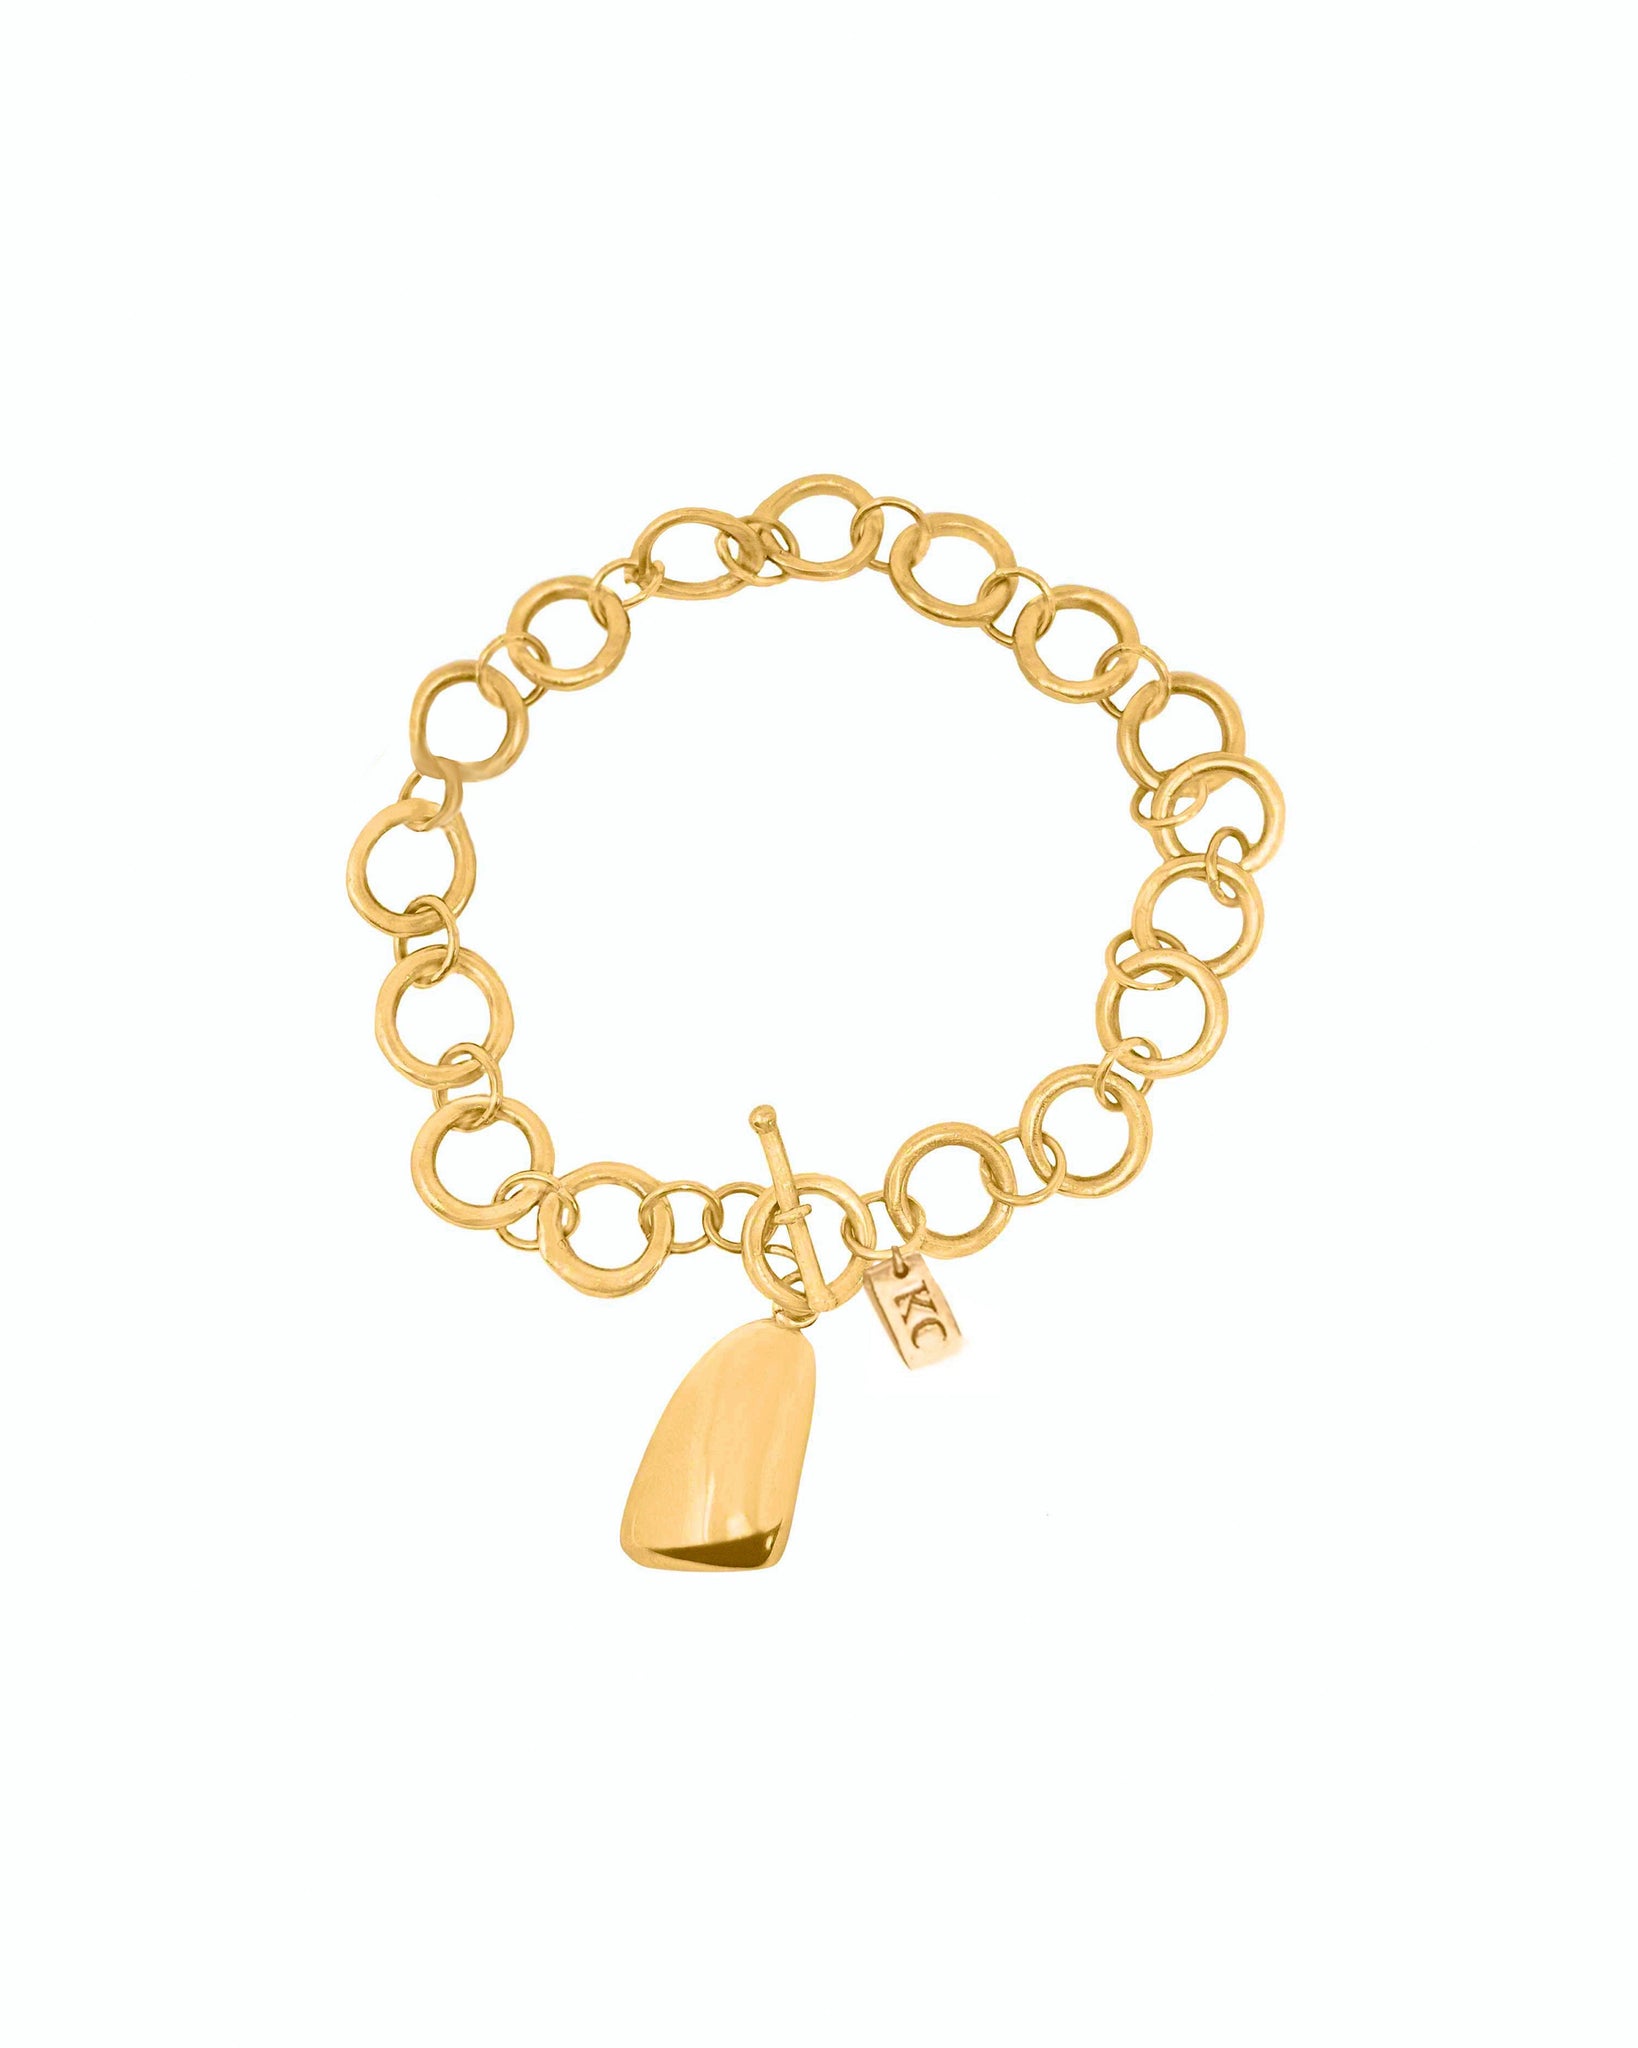 TOGGLE II CHAIN BRACELET WITH CLAM CHARM – Kendall Conrad